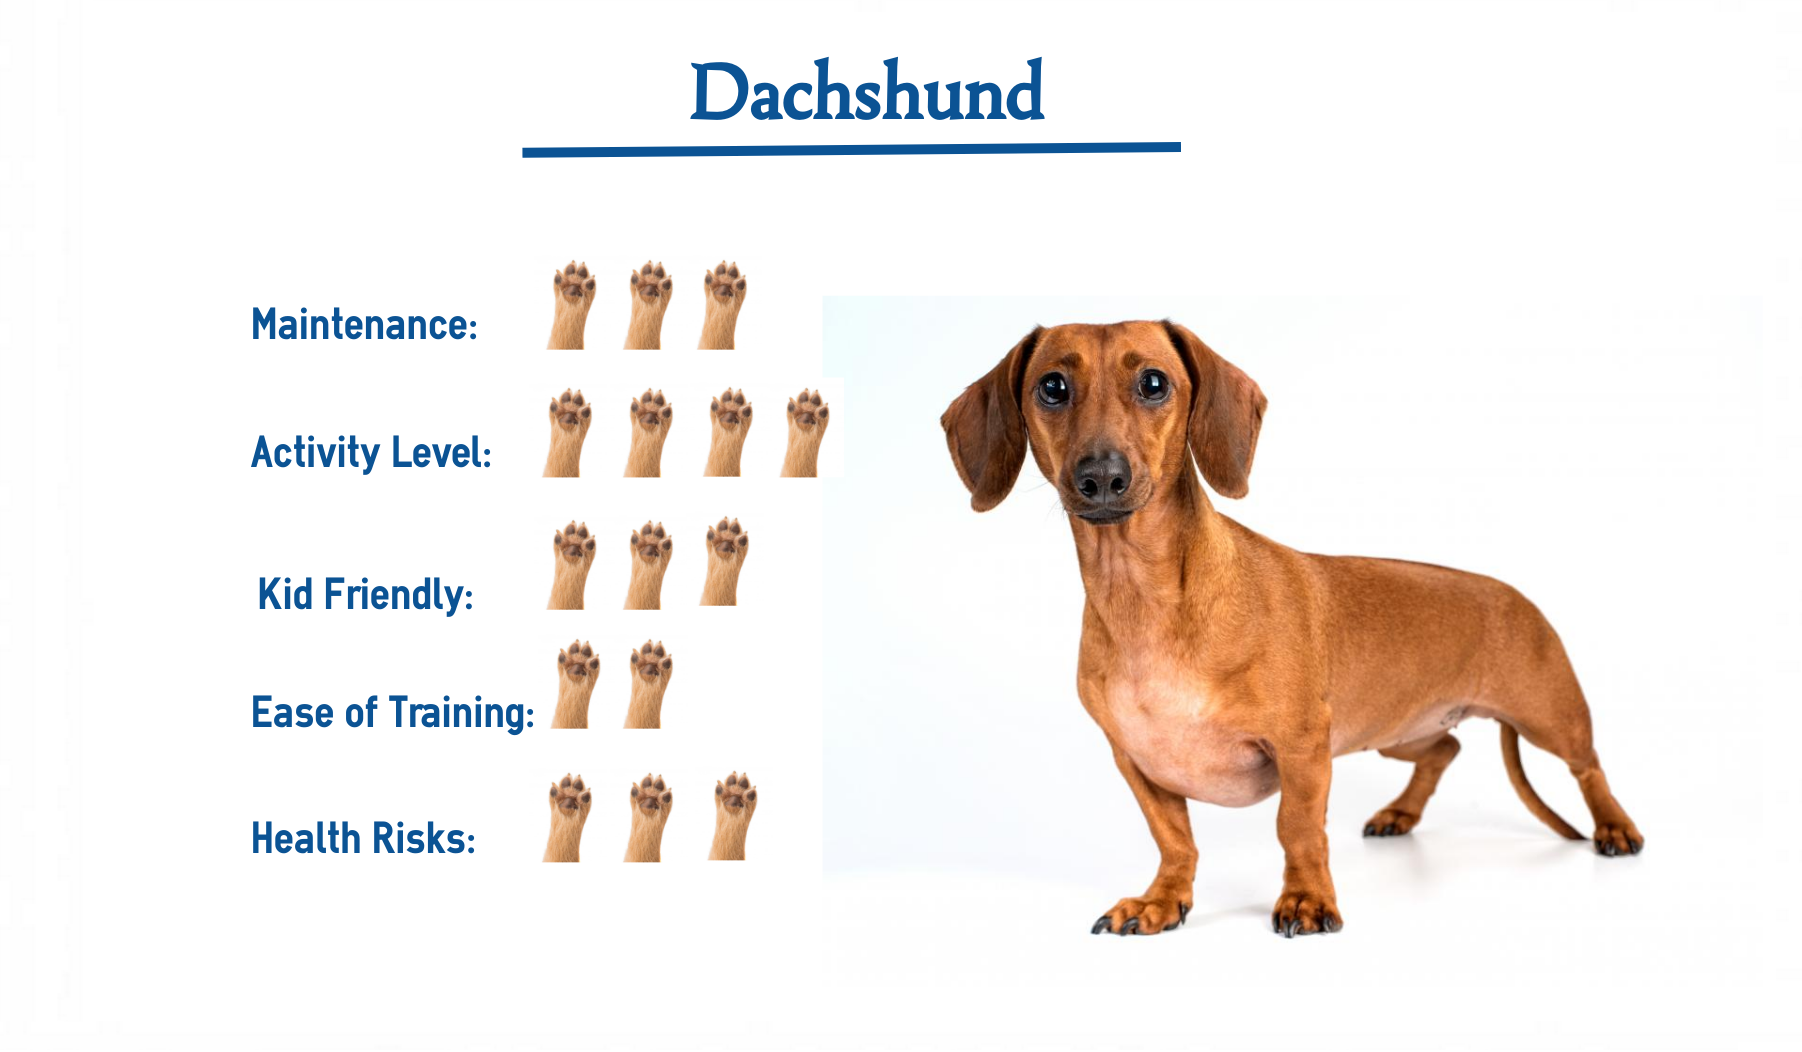 What You Need for a Dachshund